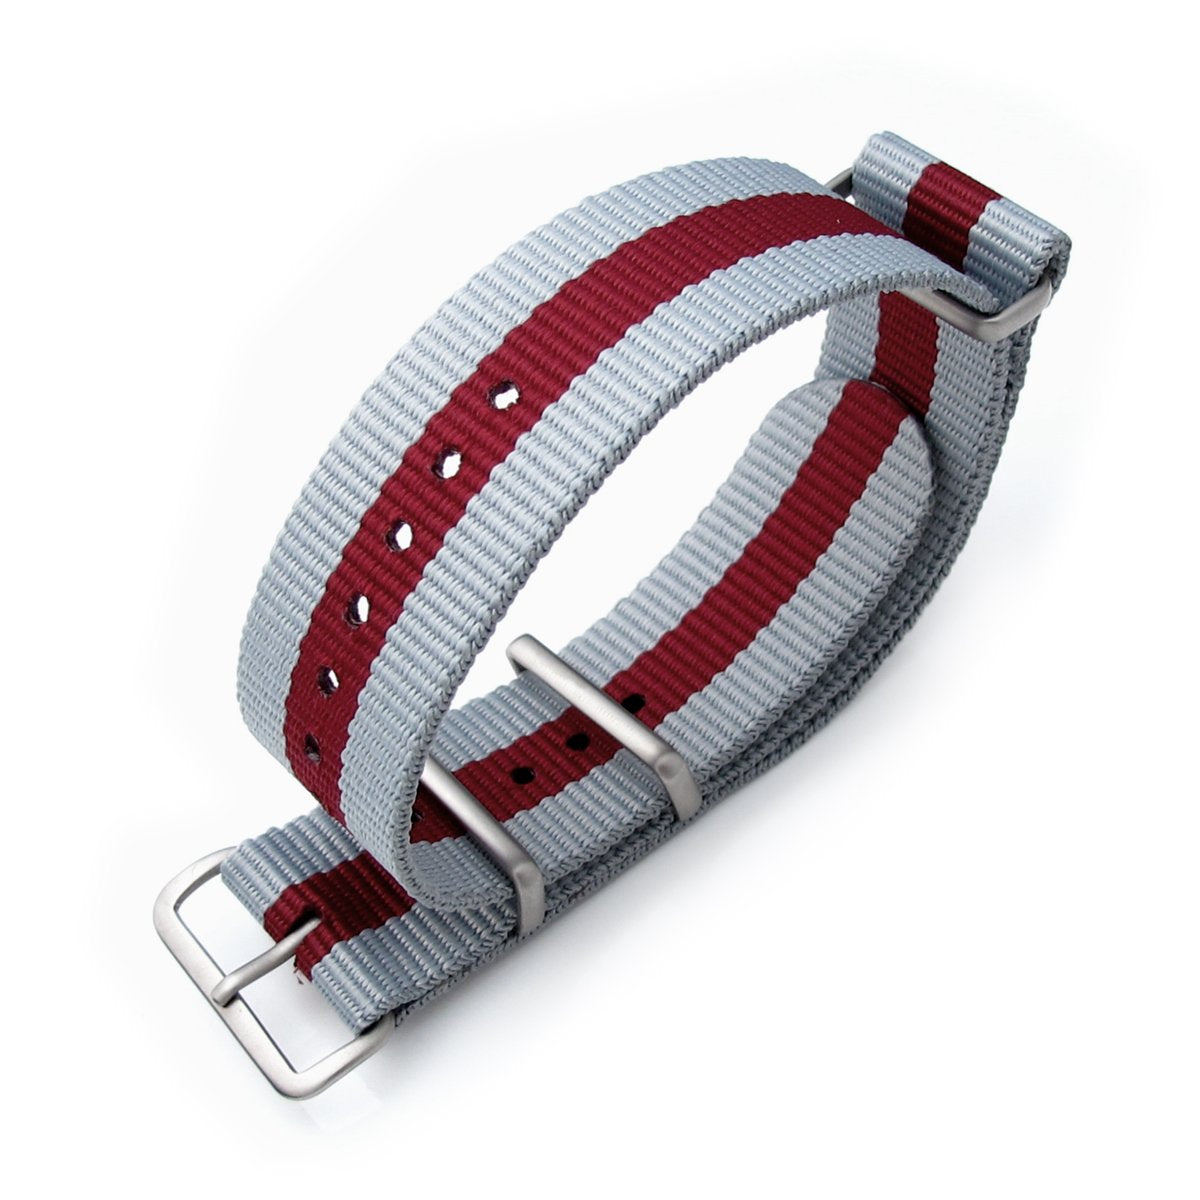 MiLTAT 20mm or 22mm G10 NATO Military Watch Strap Ballistic Nylon Armband Brushed Grey & Burgundy Red Strapcode Watch Bands